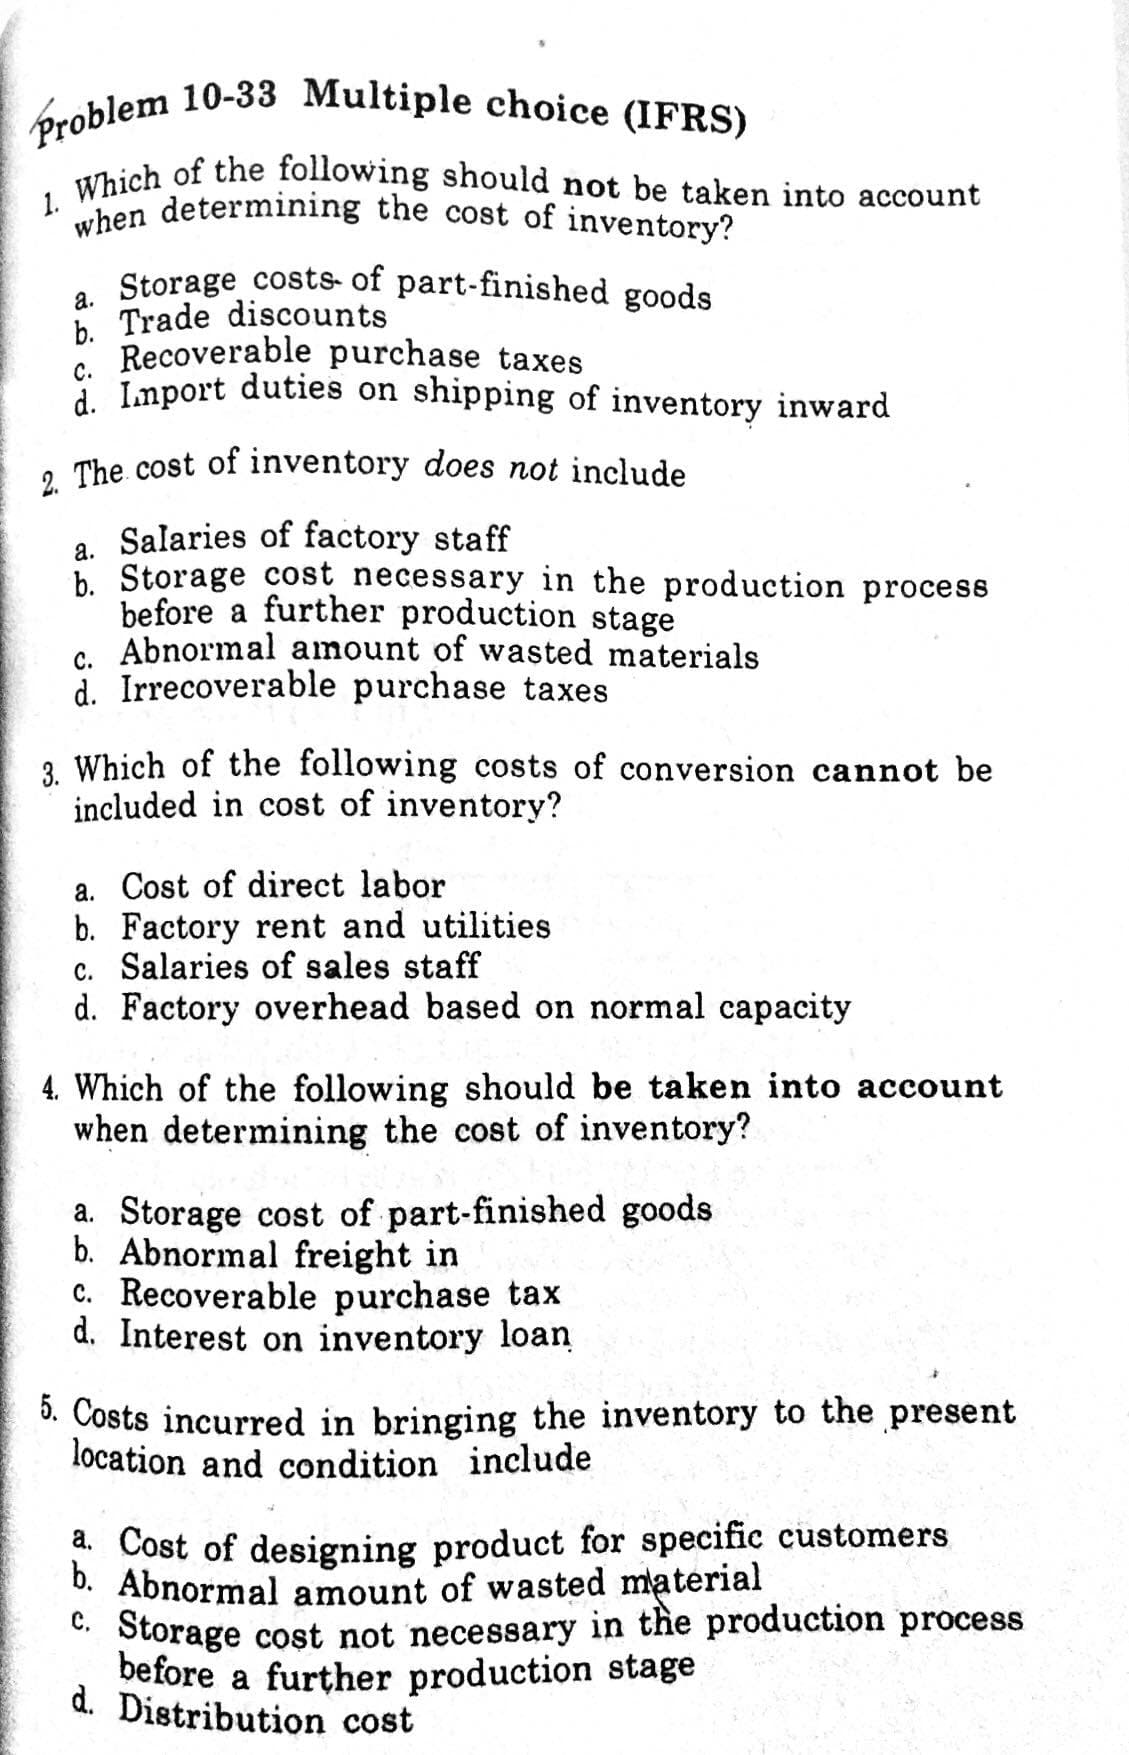 1. Which of the following should not be taken into account
Problem 10-33 Multiple choice (IFRS)
when determining the cost of inventory?
. Storage costs- of part-finished goods
b. Trade discounts
" Recoverable purchase taxes
: Lmport duties on shipping of inventory inward
, The cost of inventory does not include
a. Salaries of factory staff
b. Storage cost necessary in the production process
before a further production stage
6. Abnormal amount of wasted materials
d. Irrecoverable purchase taxes
3. Which of the following costs of conversion cannot be
included in cost of inventory?
a. Cost of direct labor
b. Factory rent and utilities
c. Salaries of sales staff
d. Factory overhead based on normal capacity
4. Which of the following should be taken into account
when determining the cost of inventory?
a. Storage cost of part-finished goods
b. Abnormal freight in
c. Recoverable purchase tax
d. Interest on inventory loan
3. Costs incurred in bringing the inventory to the present
location and condition include
* Cost of designing product for specific customers
D. Abnormal amount of wasted material
C. Storage cost not necessary in the production process
before a further production stage
d. Distribution cost
